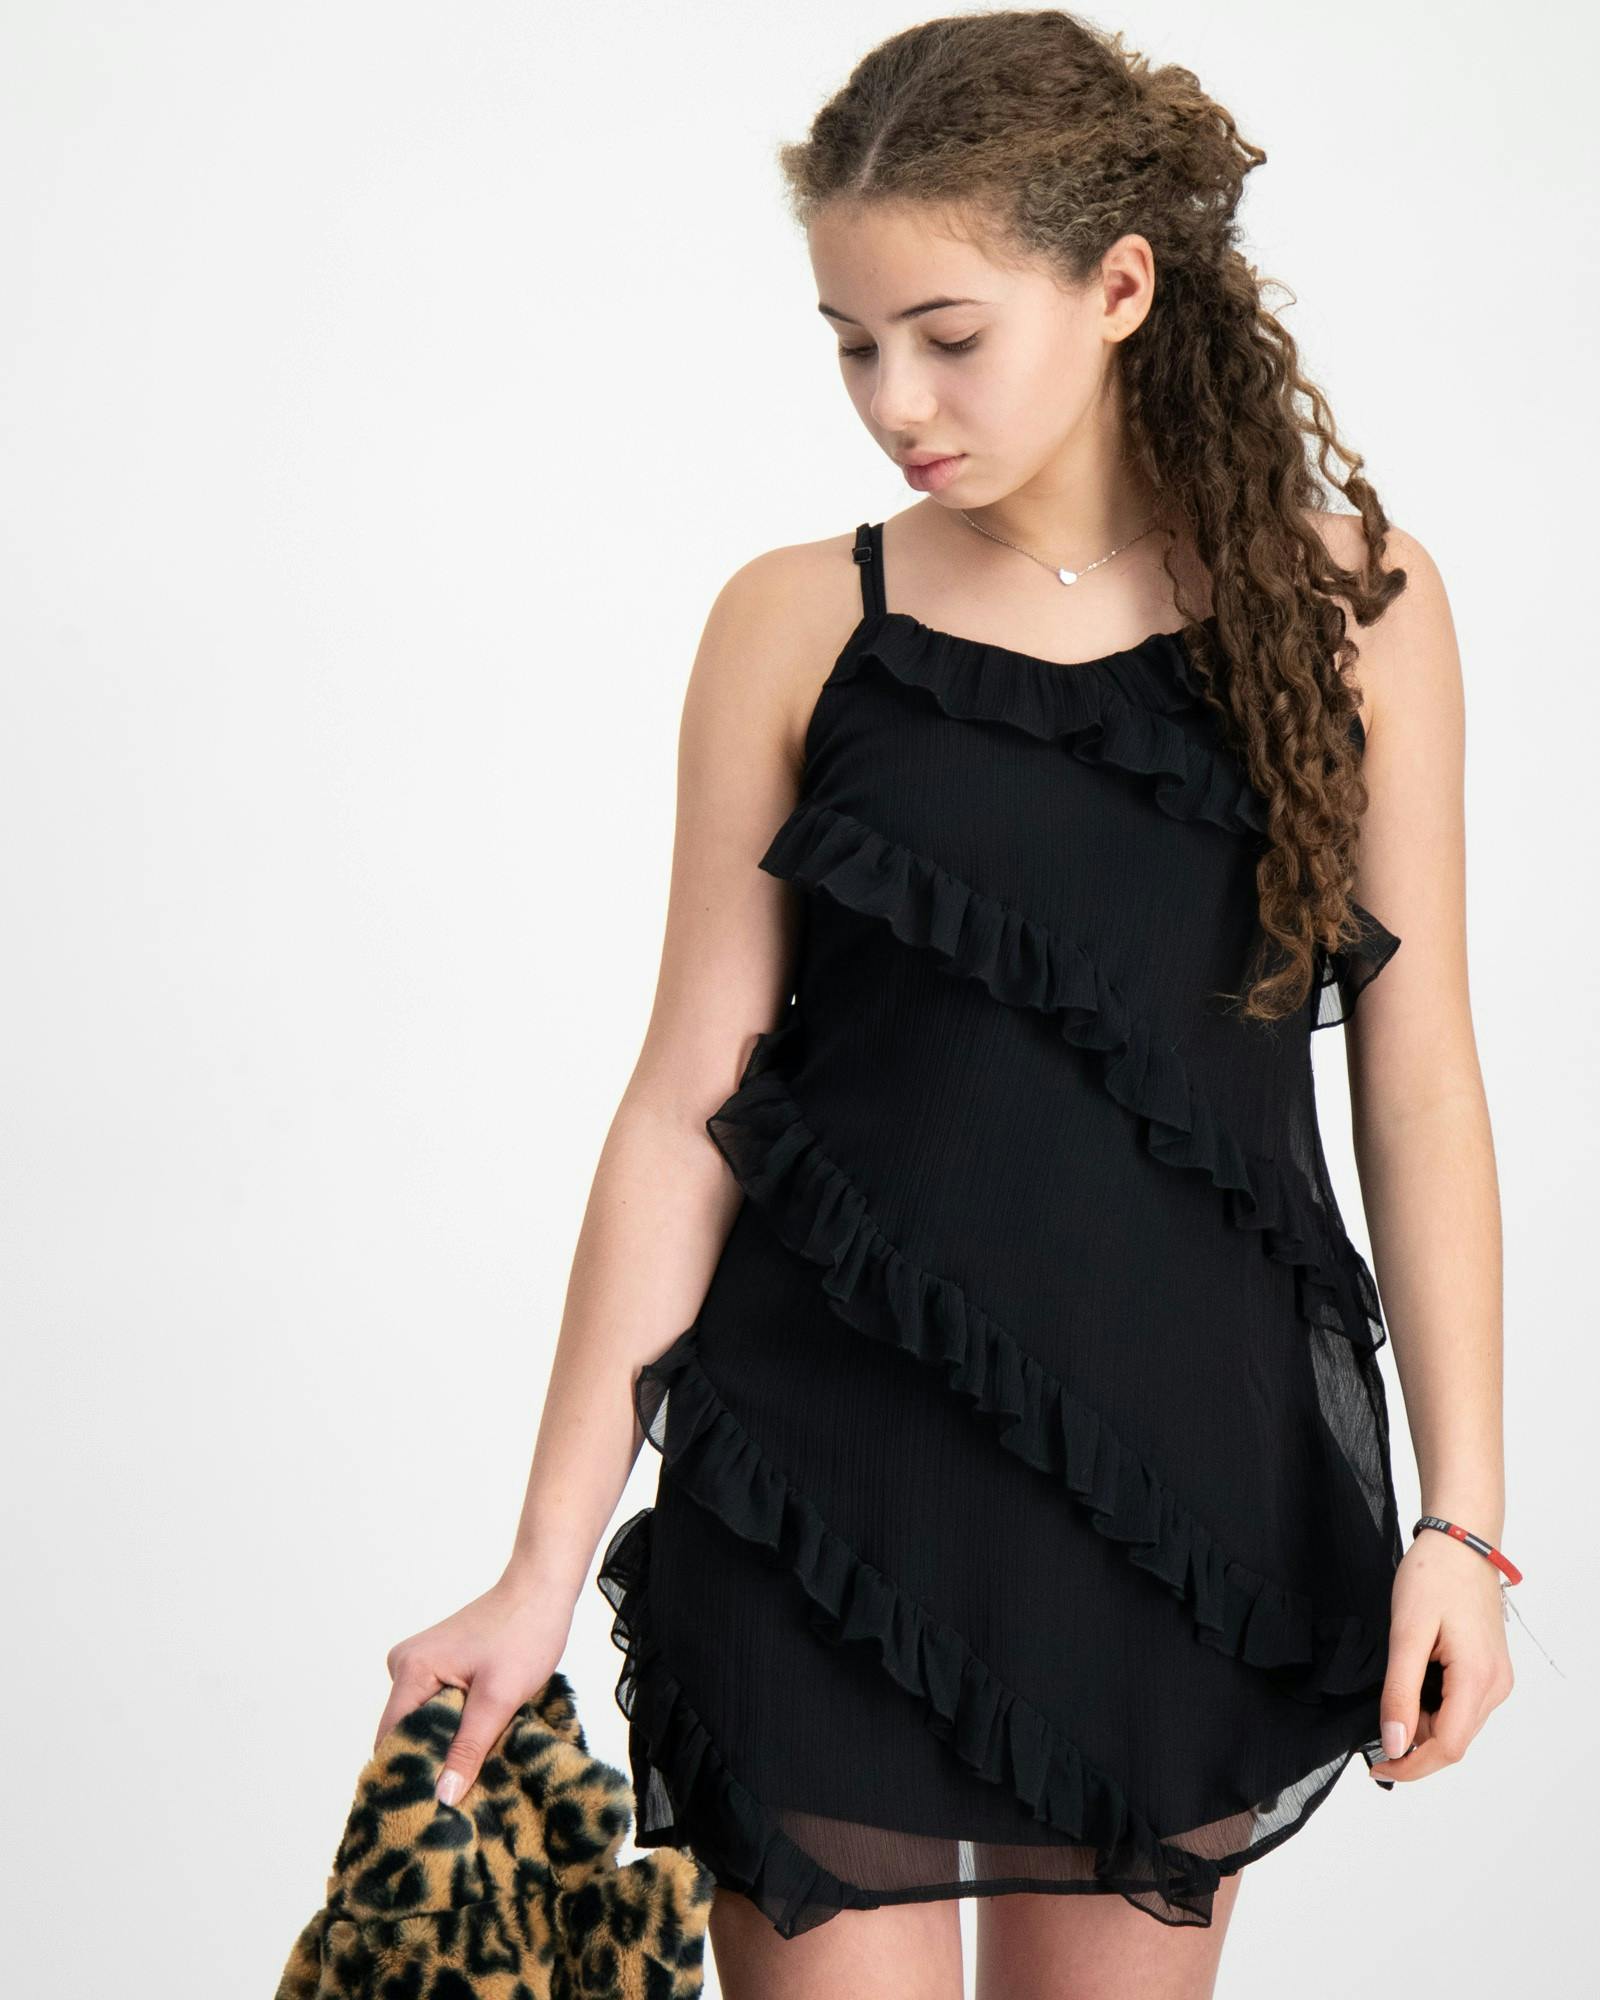 Y party frill dress